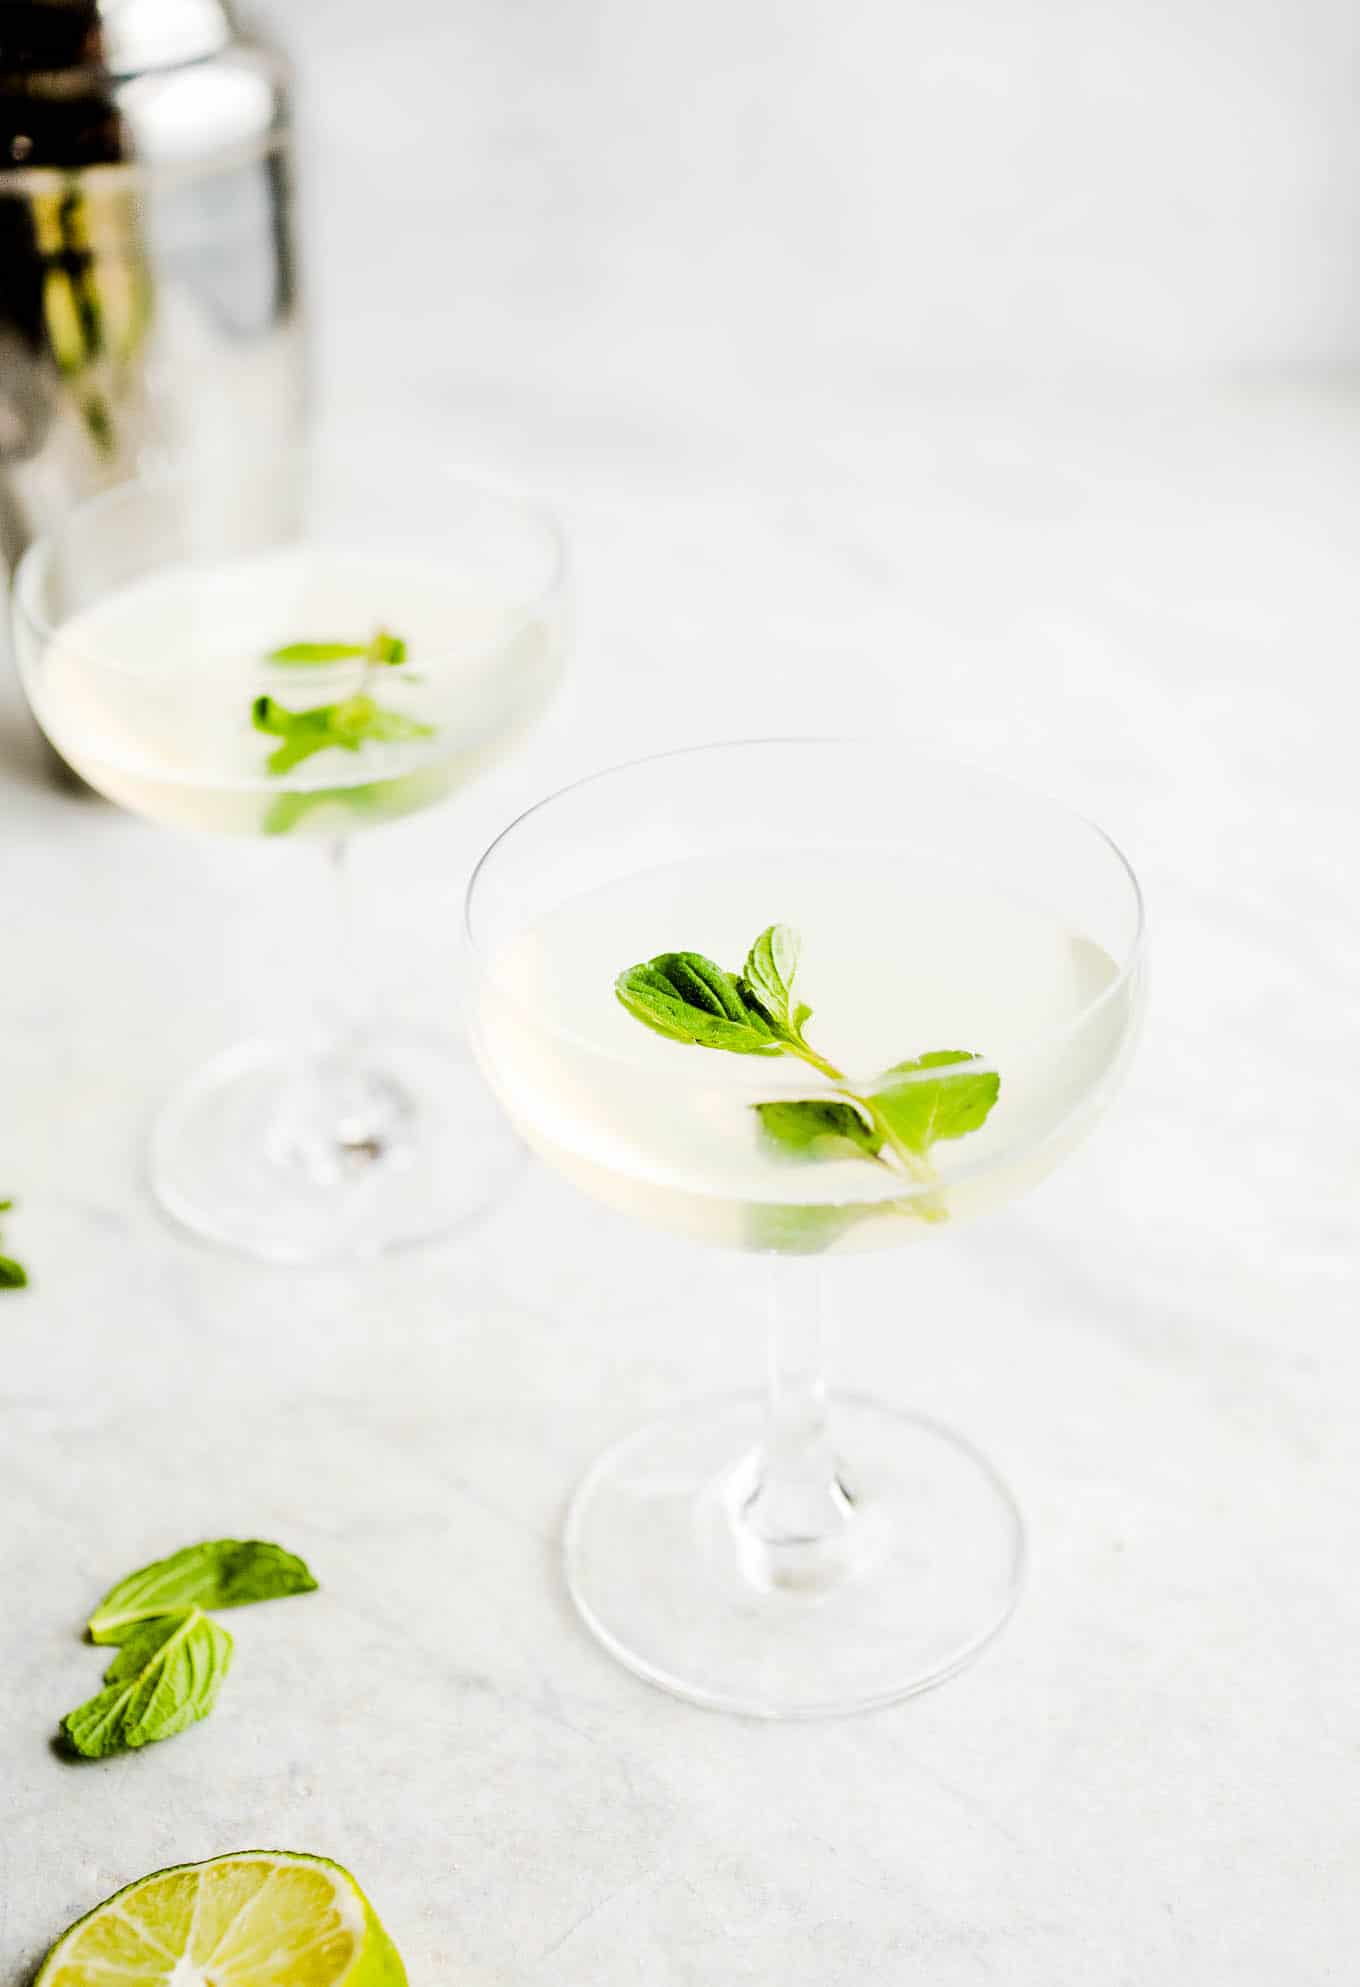 Two gimlet cocktails with fresh mint garnishes on top.